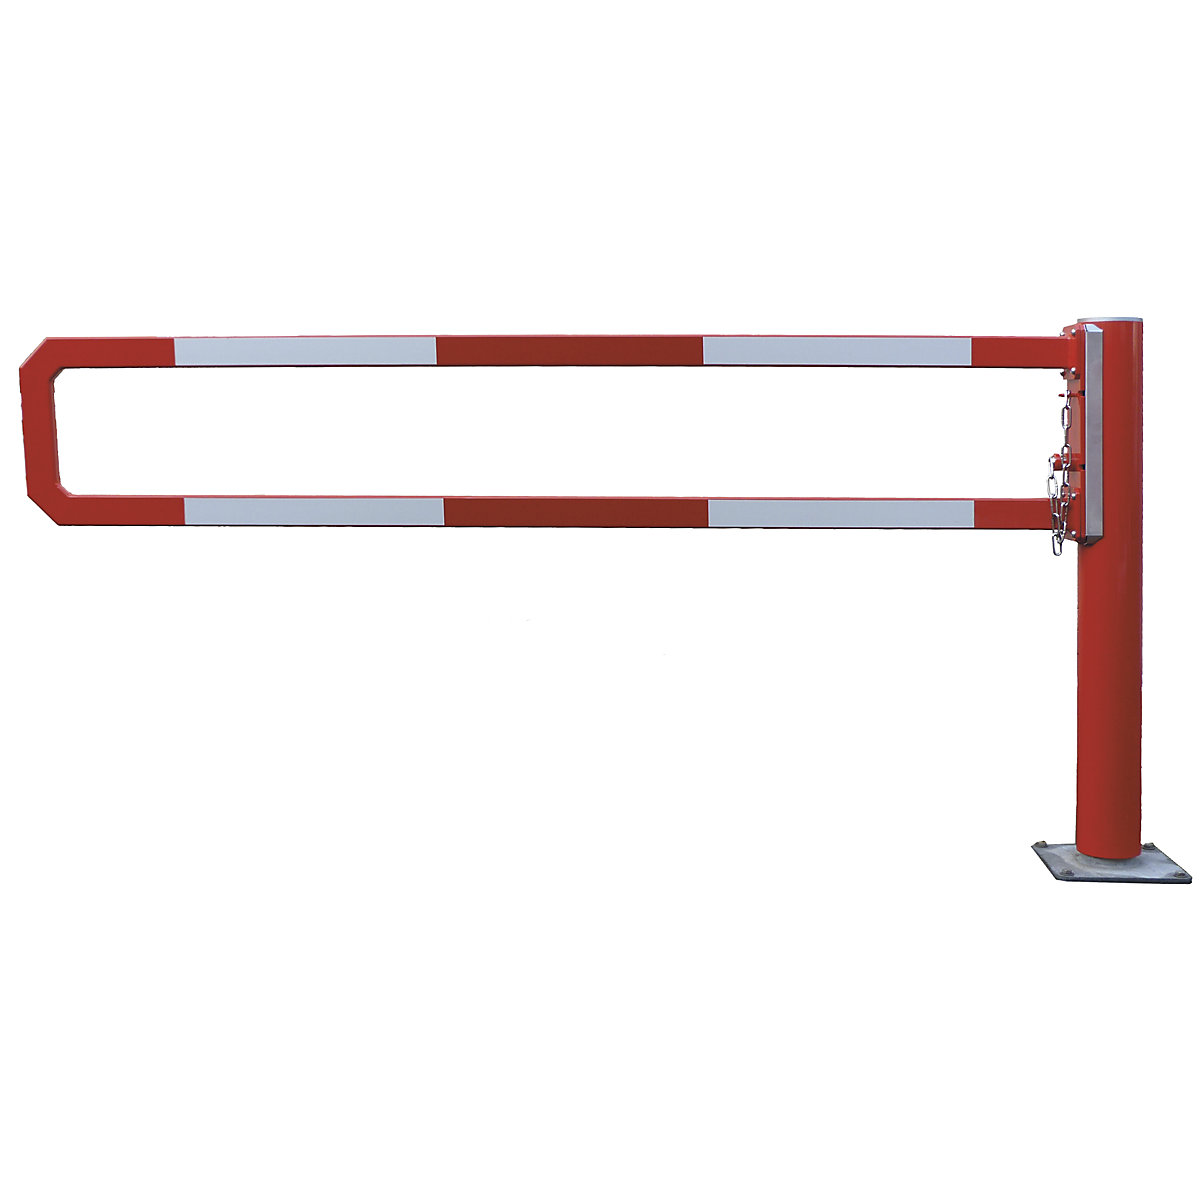 Revolving access barrier – Mannus, clearance width 1.5 m, hot dip galvanised and powder coated red